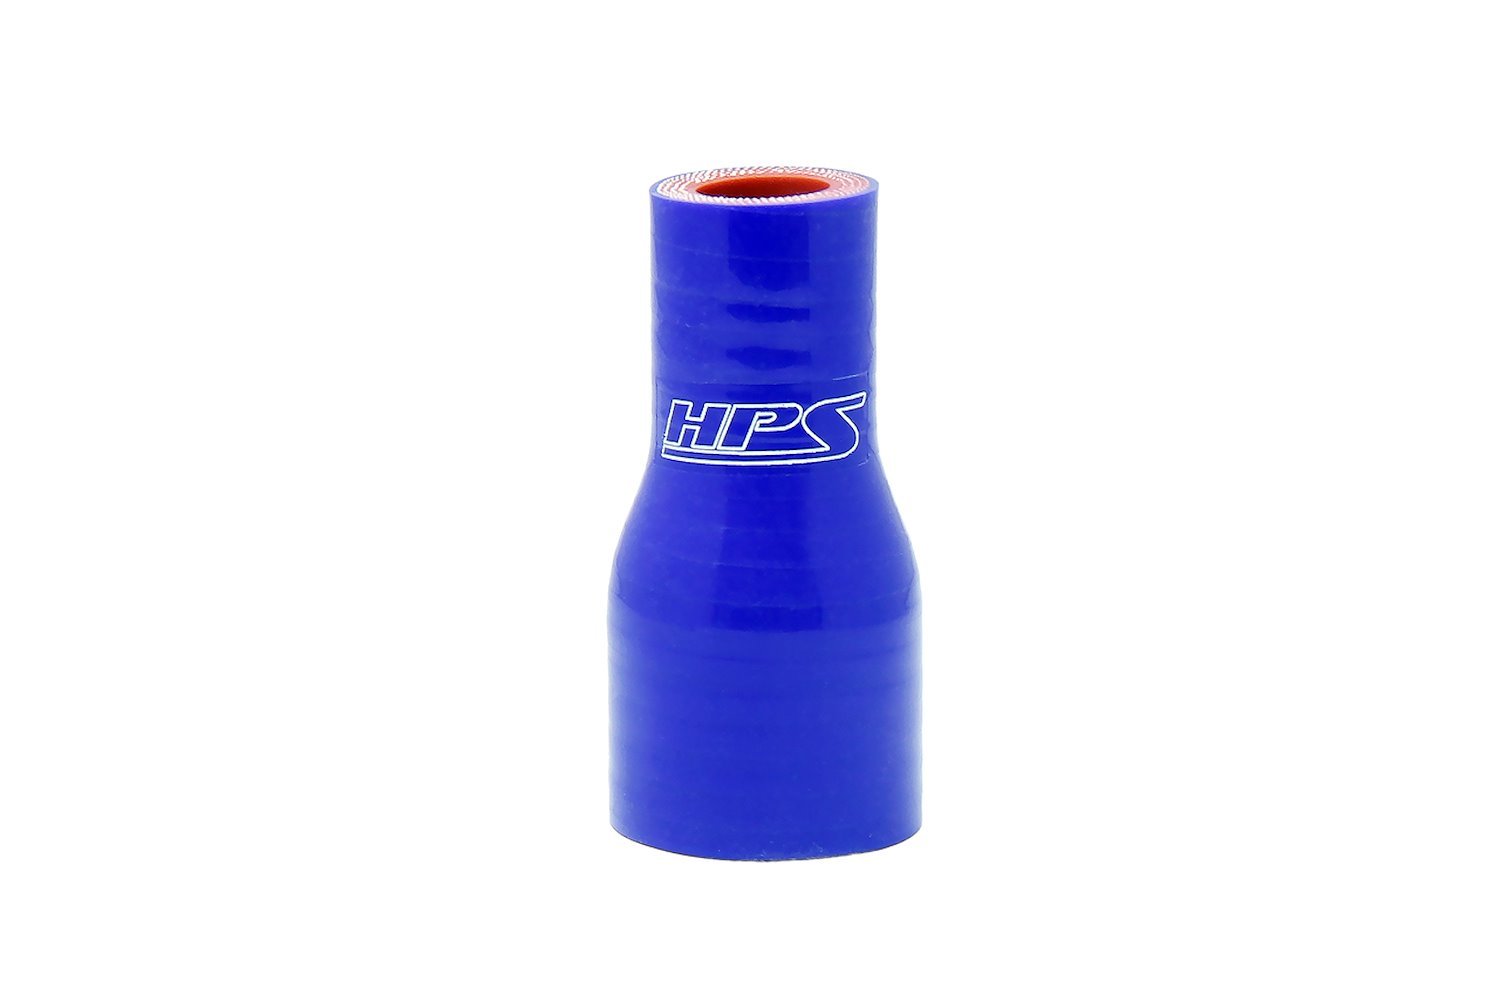 HTSR-112-175-BLUE Silicone Reducer Hose, High-Temp 4-Ply Reinforced, 1-1/8 in. - 1-3/4 in. ID, 3 in. Long, Blue